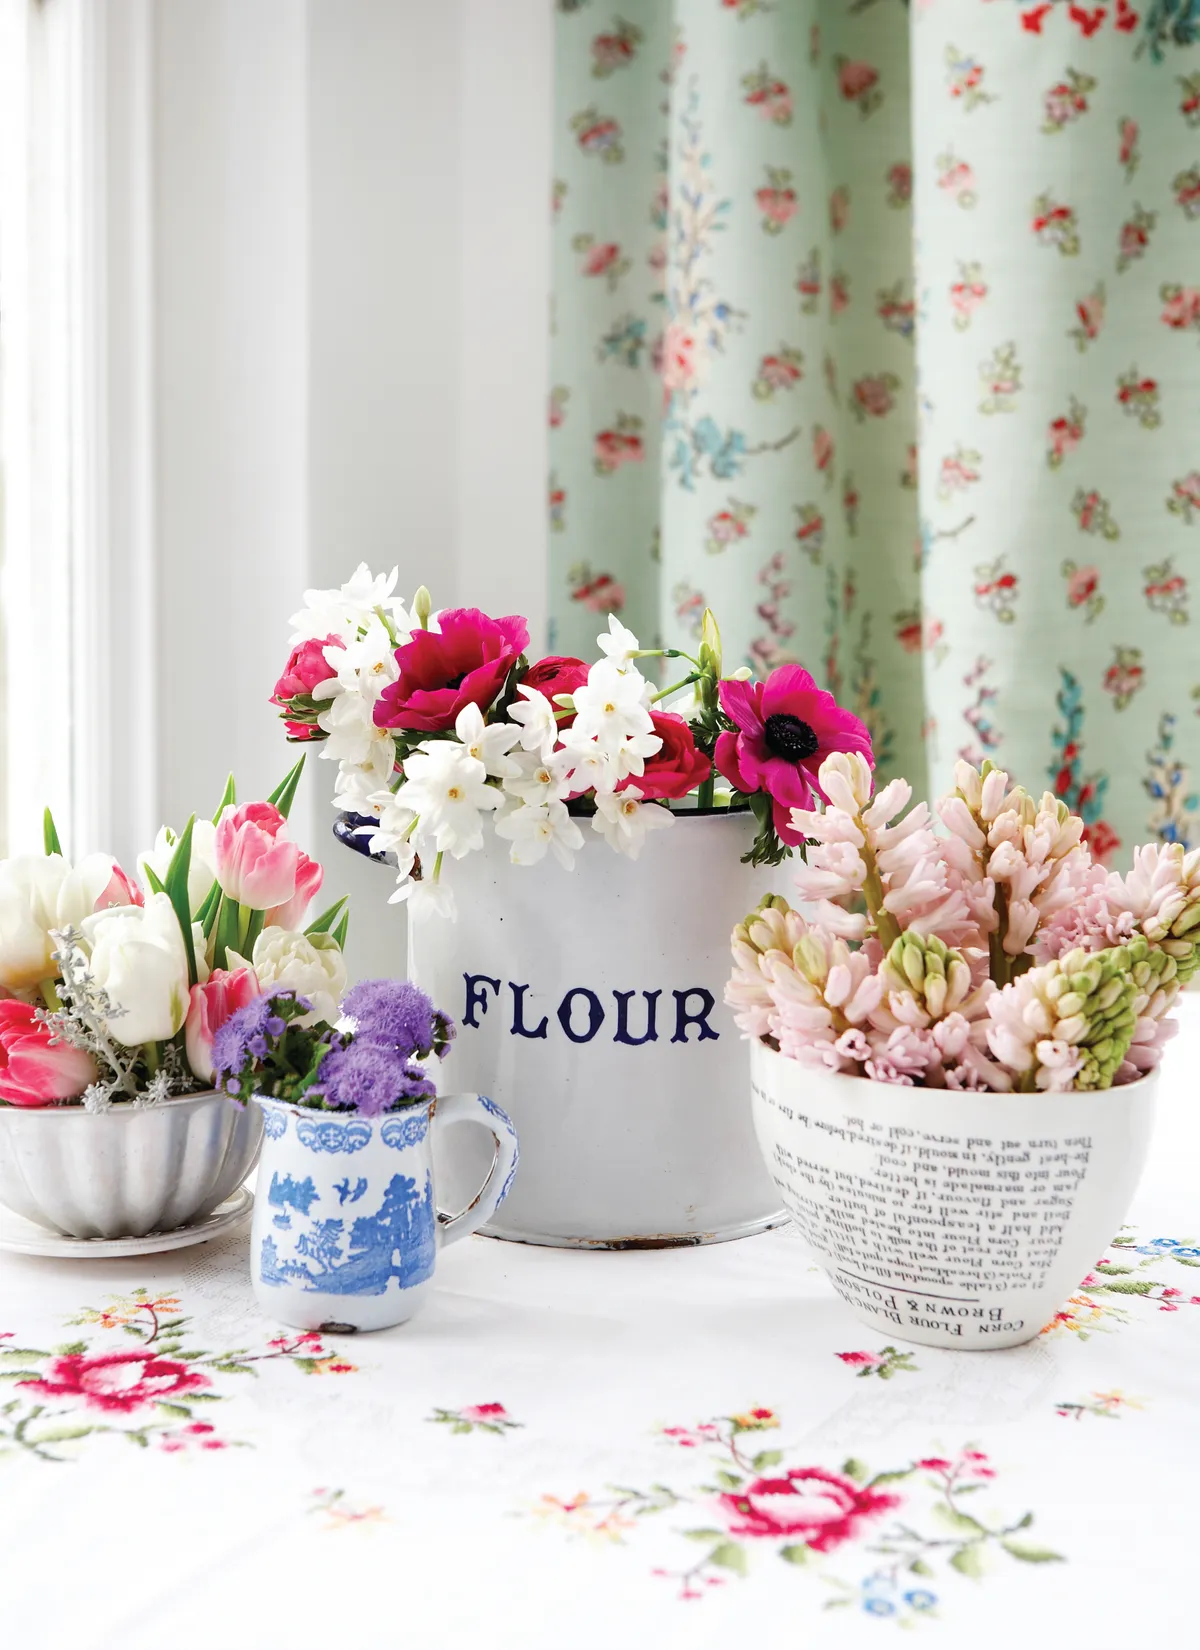 A collection of vintage bowls, vases and jugs filled with spring flowers.